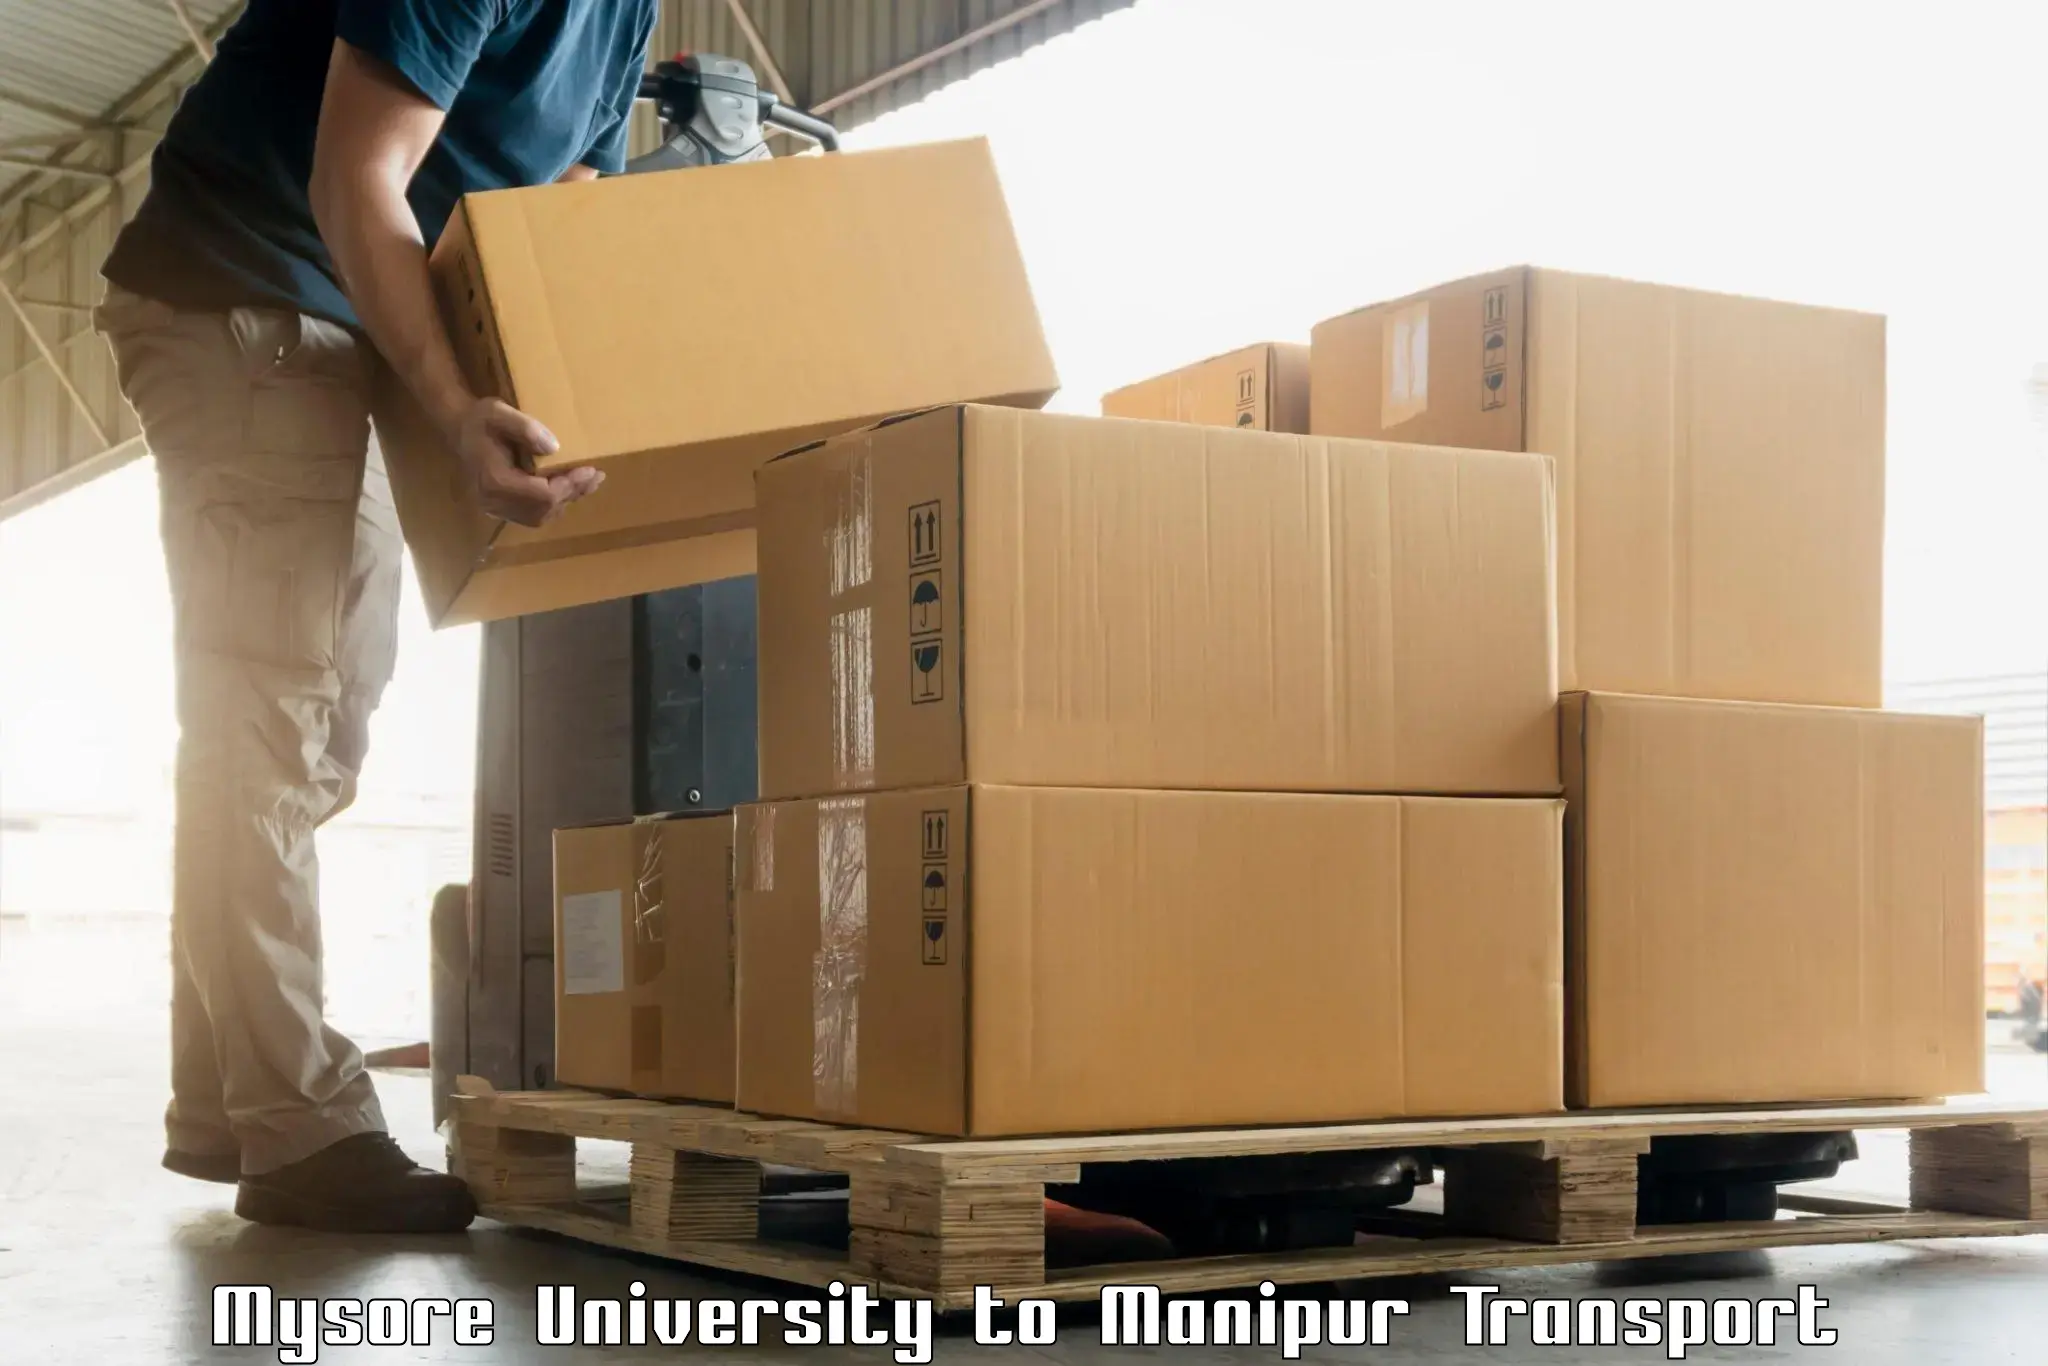 Vehicle courier services in Mysore University to Manipur